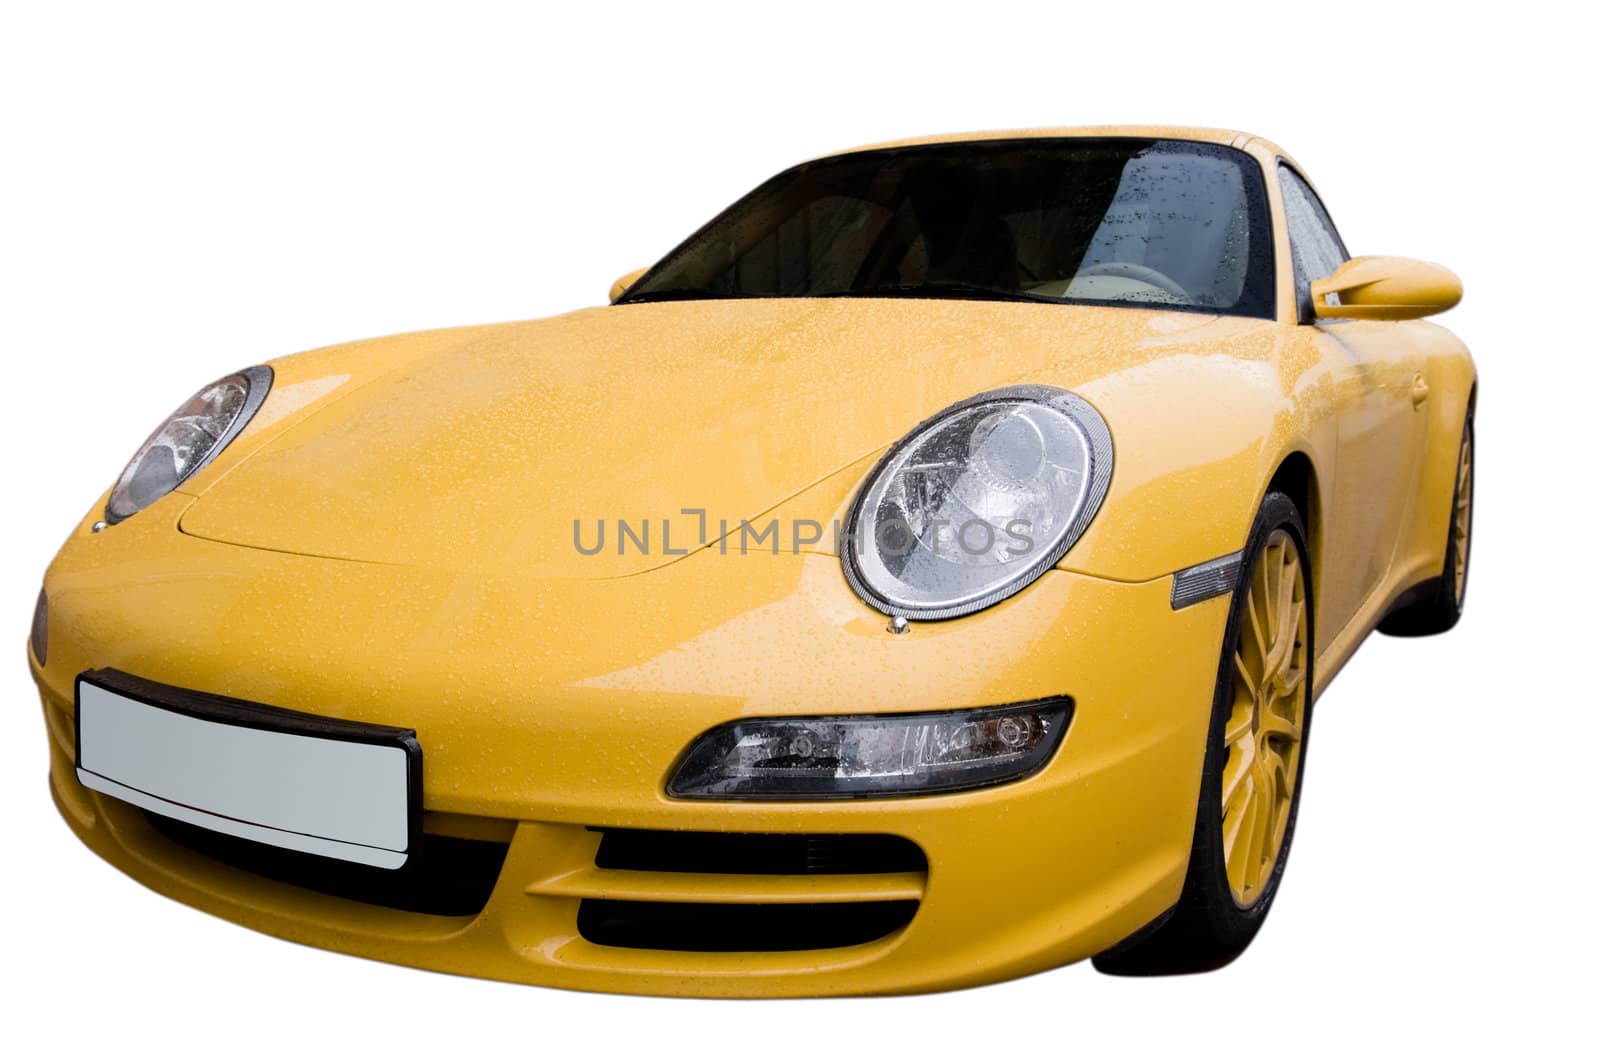 The wet yellow car isolated on a white background.